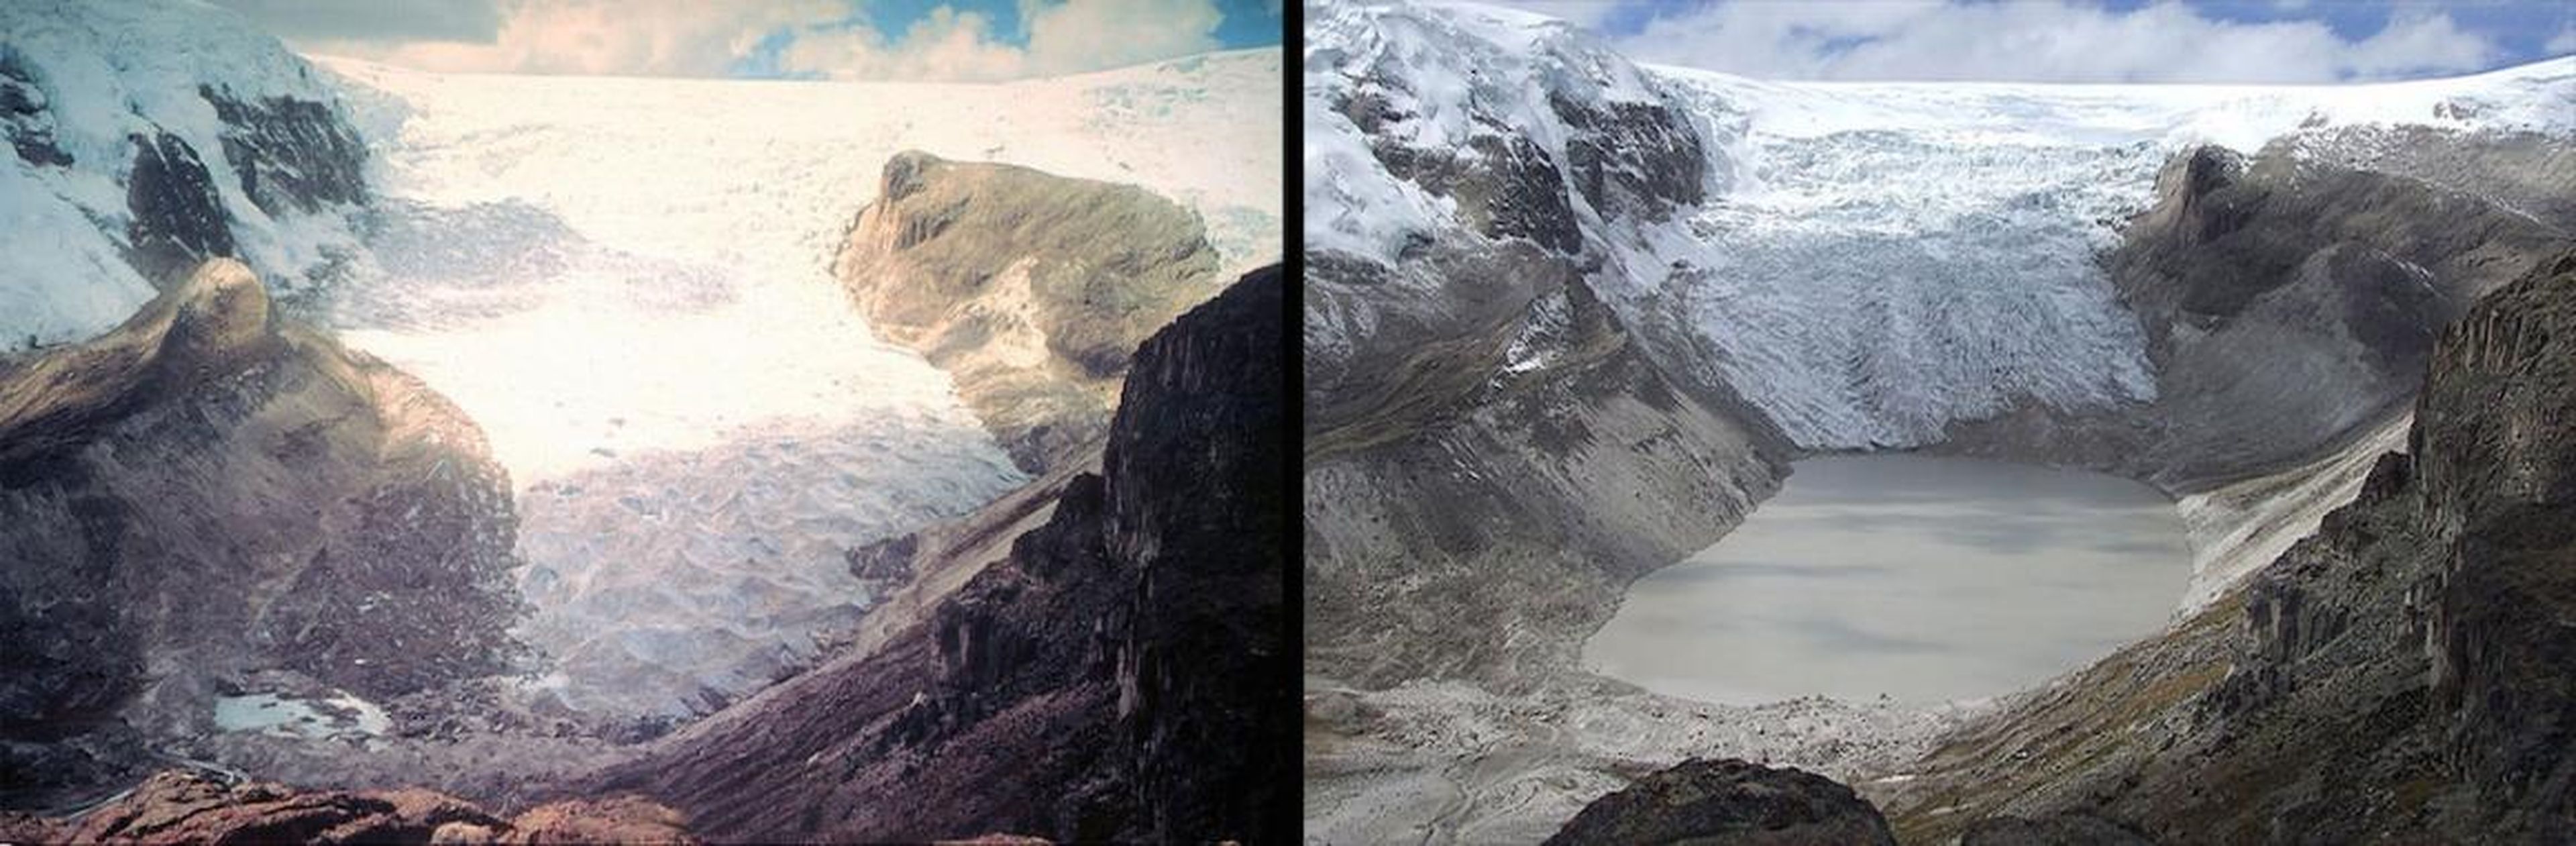 Glaciers that aren't in the Arctic are retreating, too. Here's Peru's Qori Kalis Glacier in 1978 (left) and again in 2011 (right).